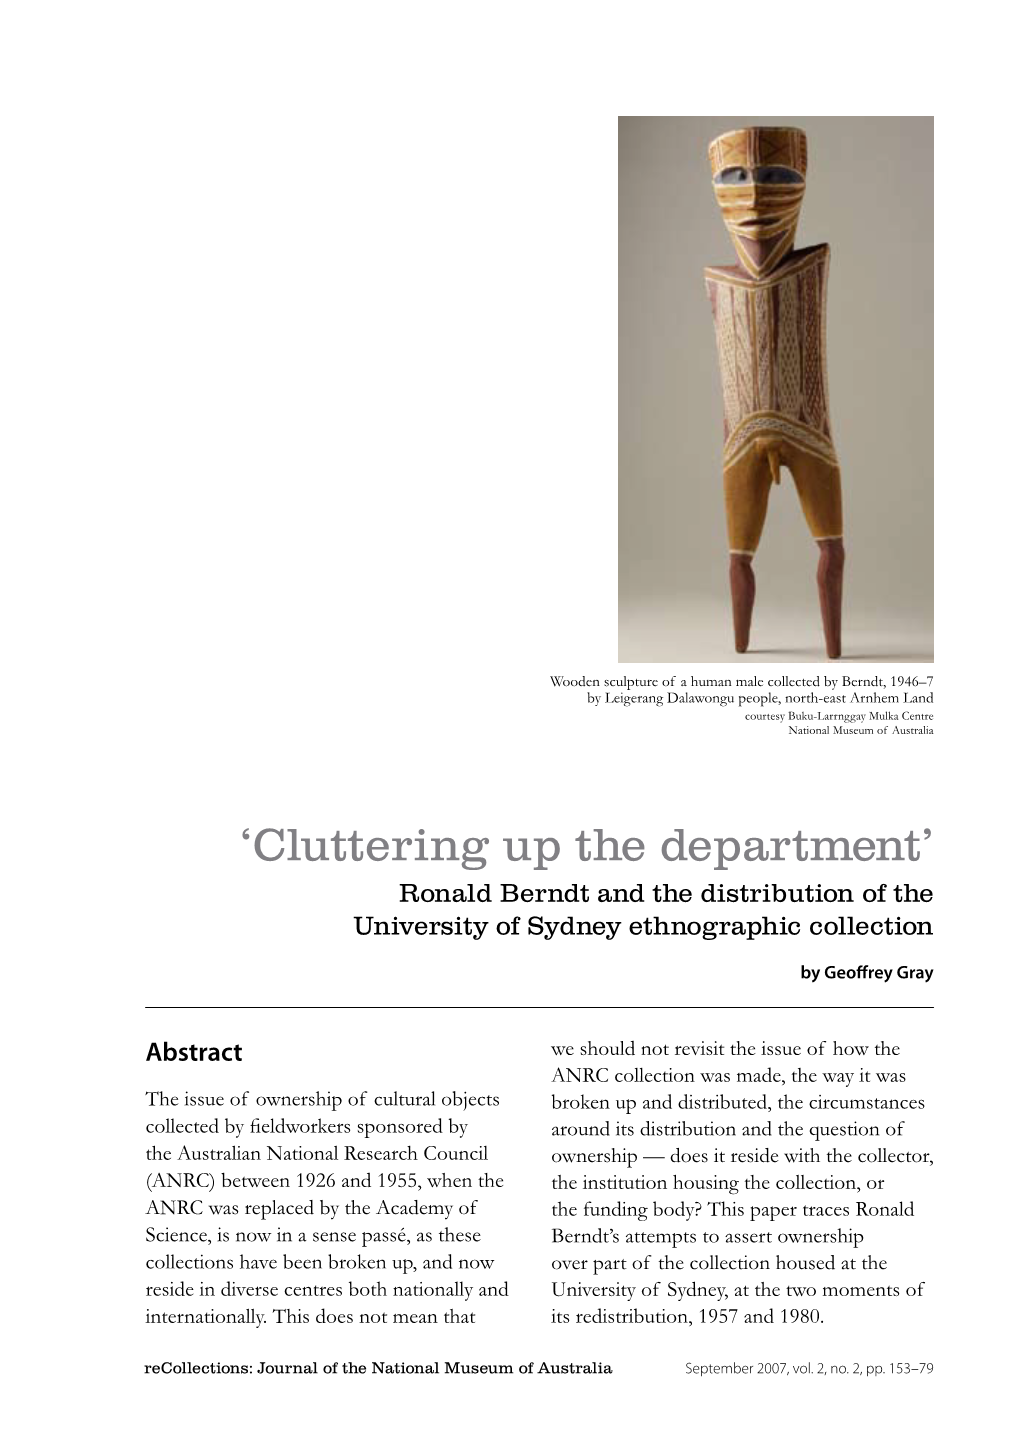 'Cluttering up the Department'